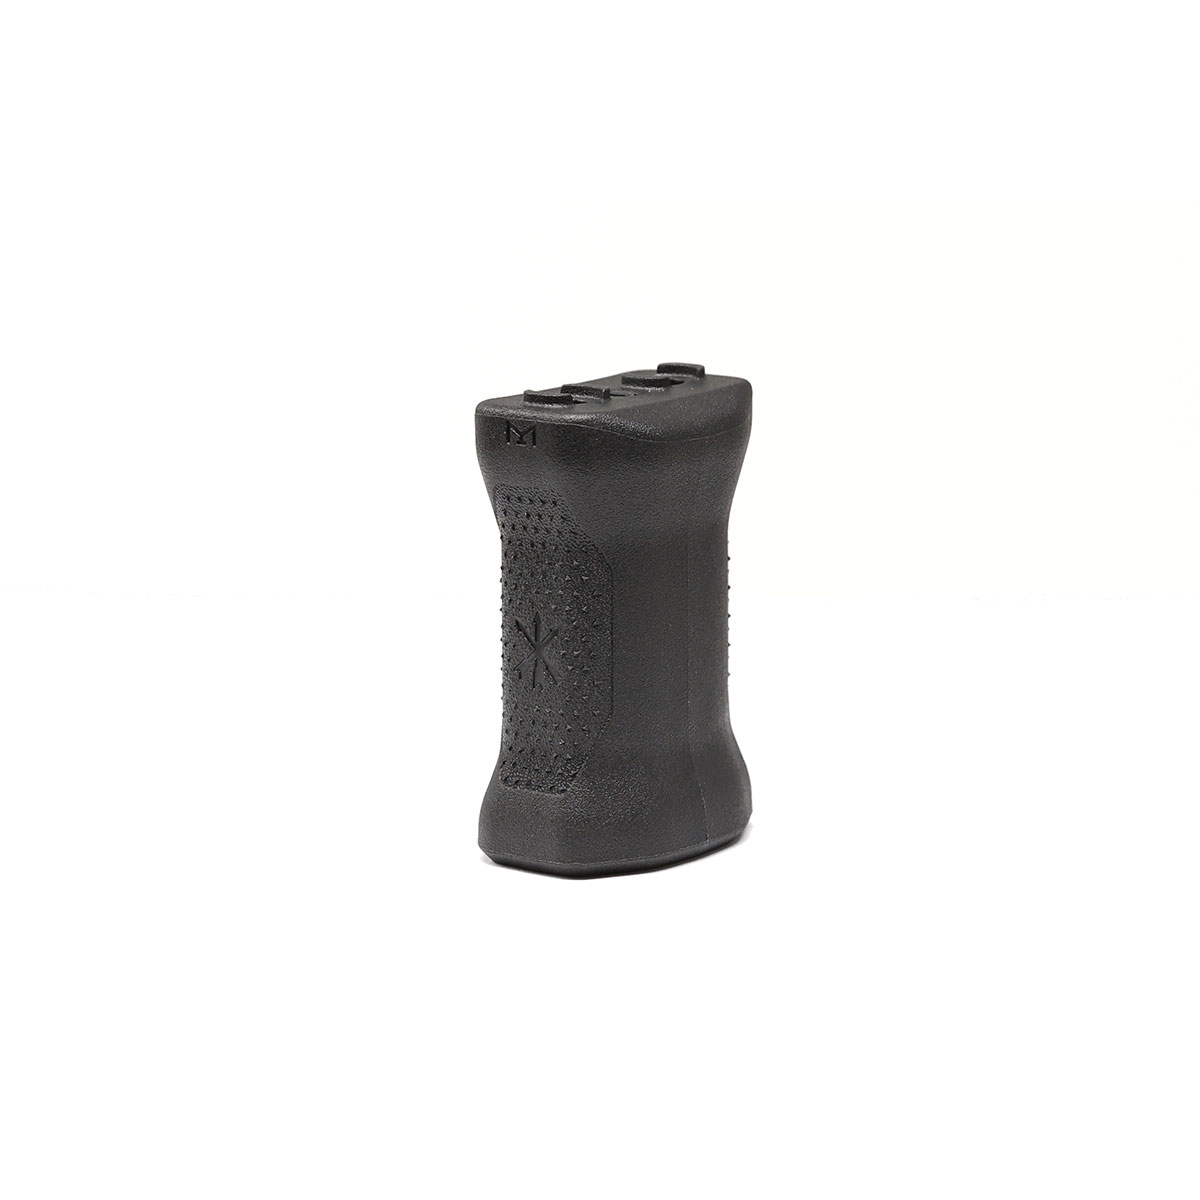 UNITY TACTICAL - VERTICAL FORE GRIP GEN 2